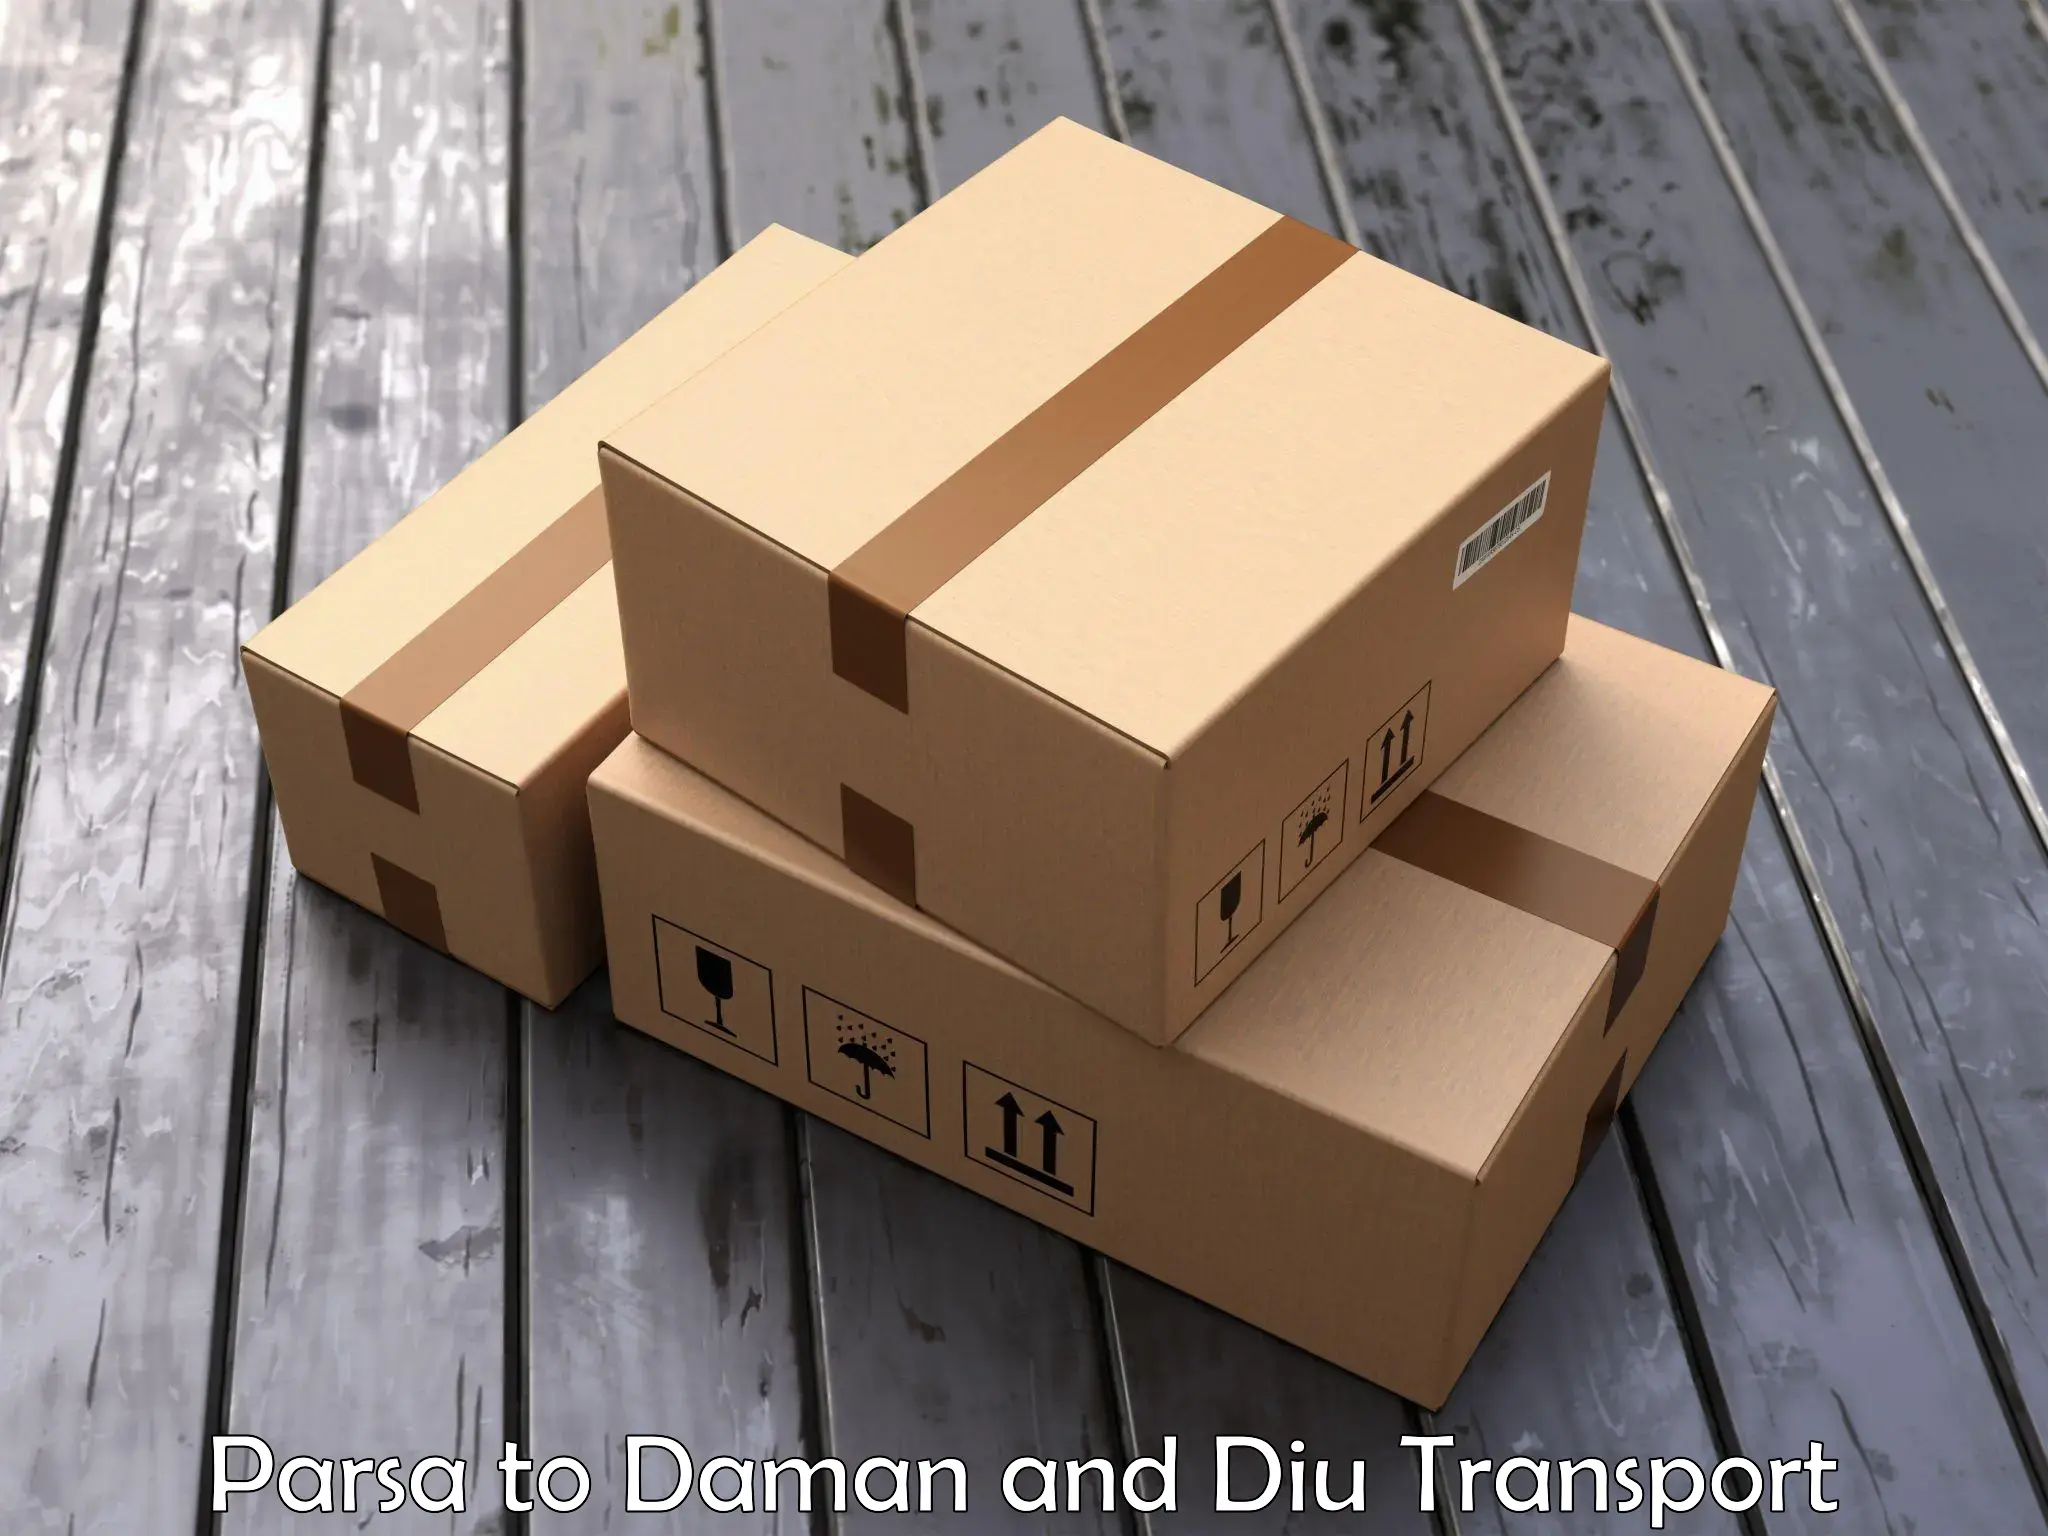 Truck transport companies in India Parsa to Daman